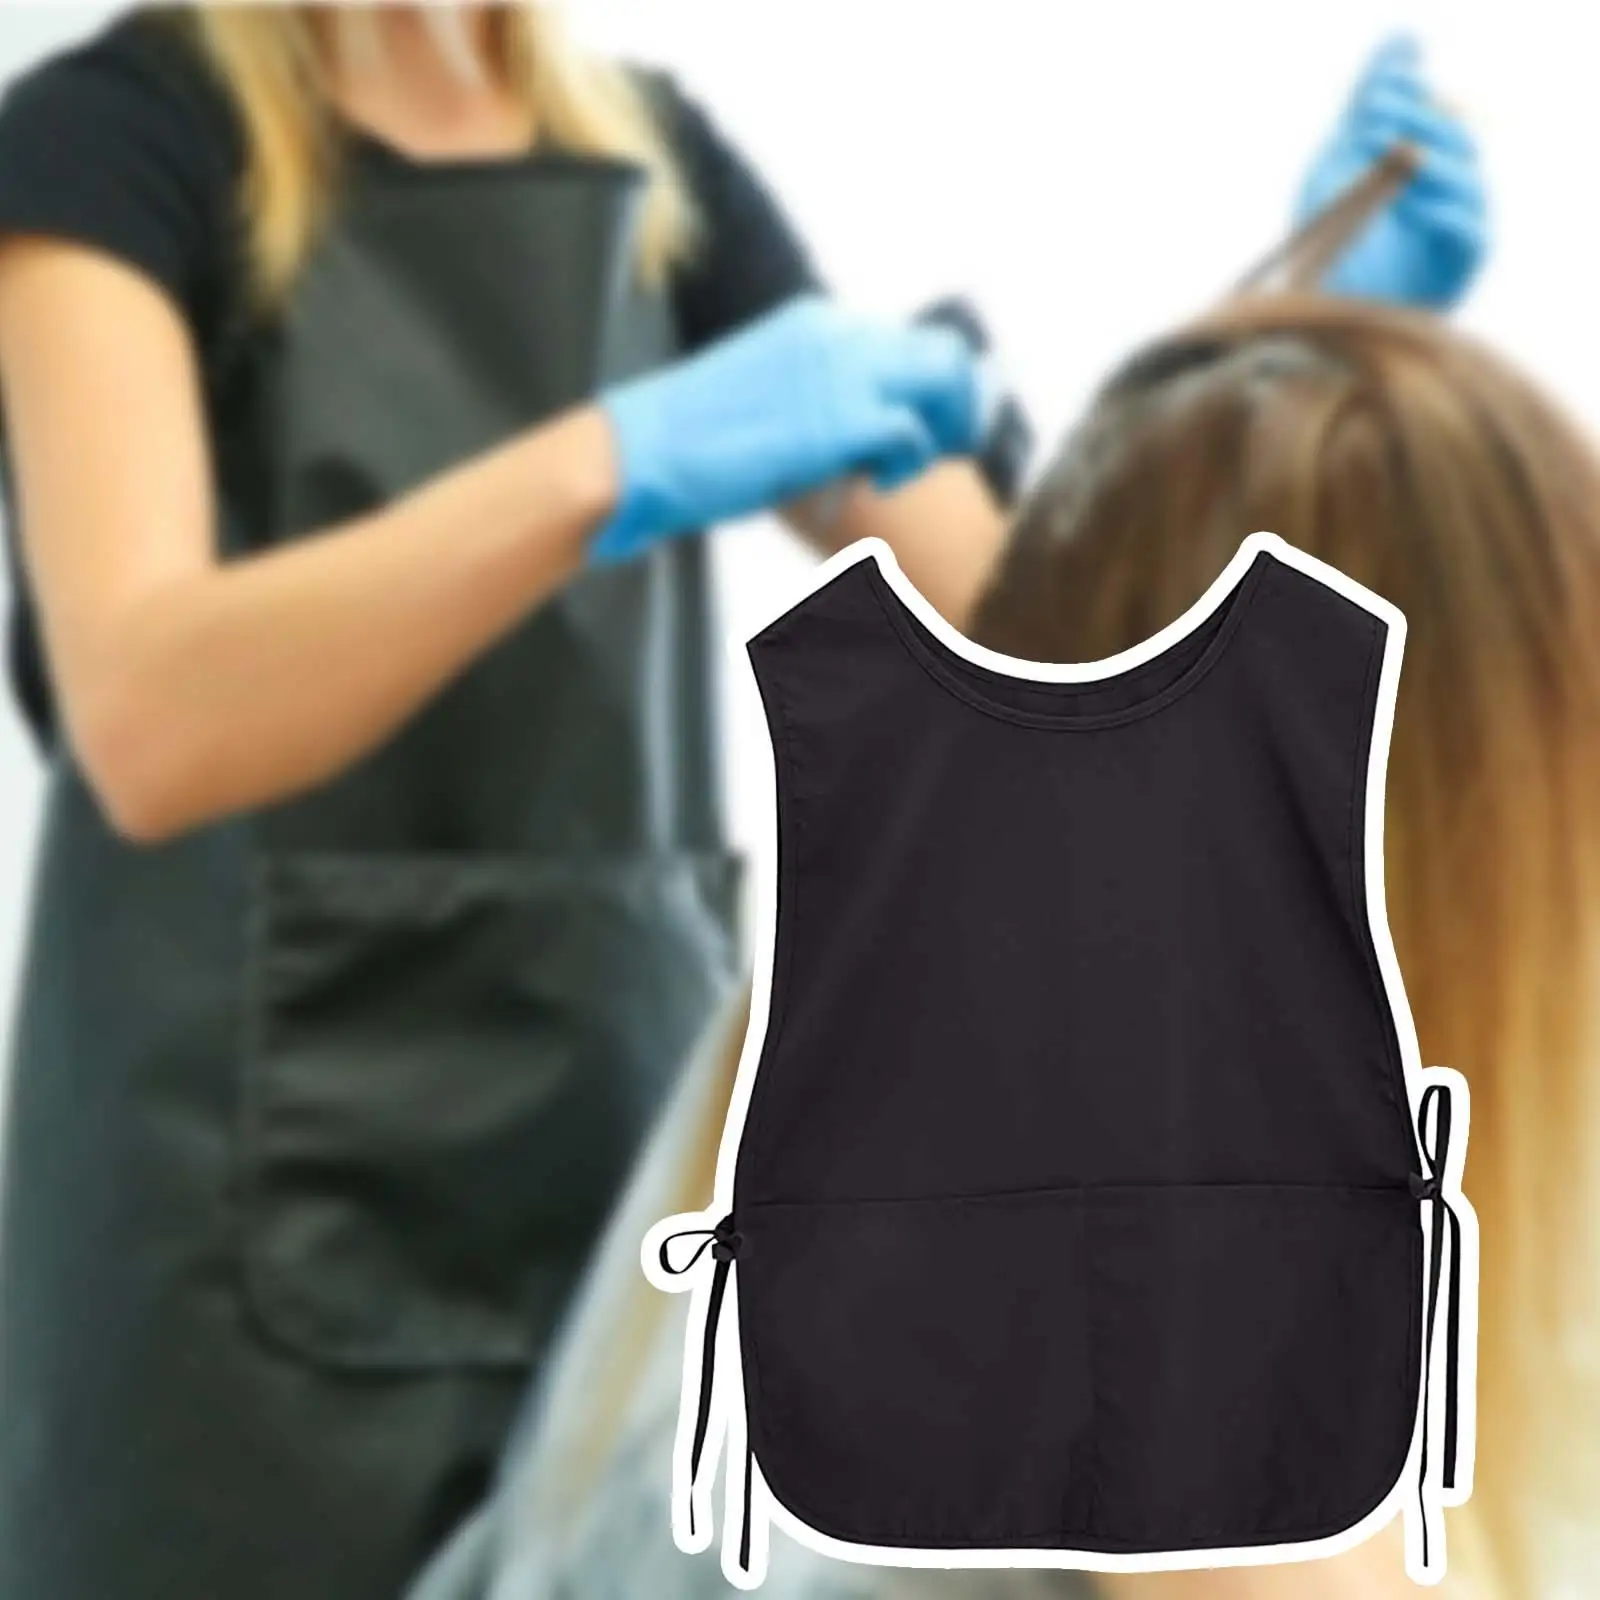 Salon Hair Stylist Apron Adjustable Strap Durable for Modeling Ceramic Clay